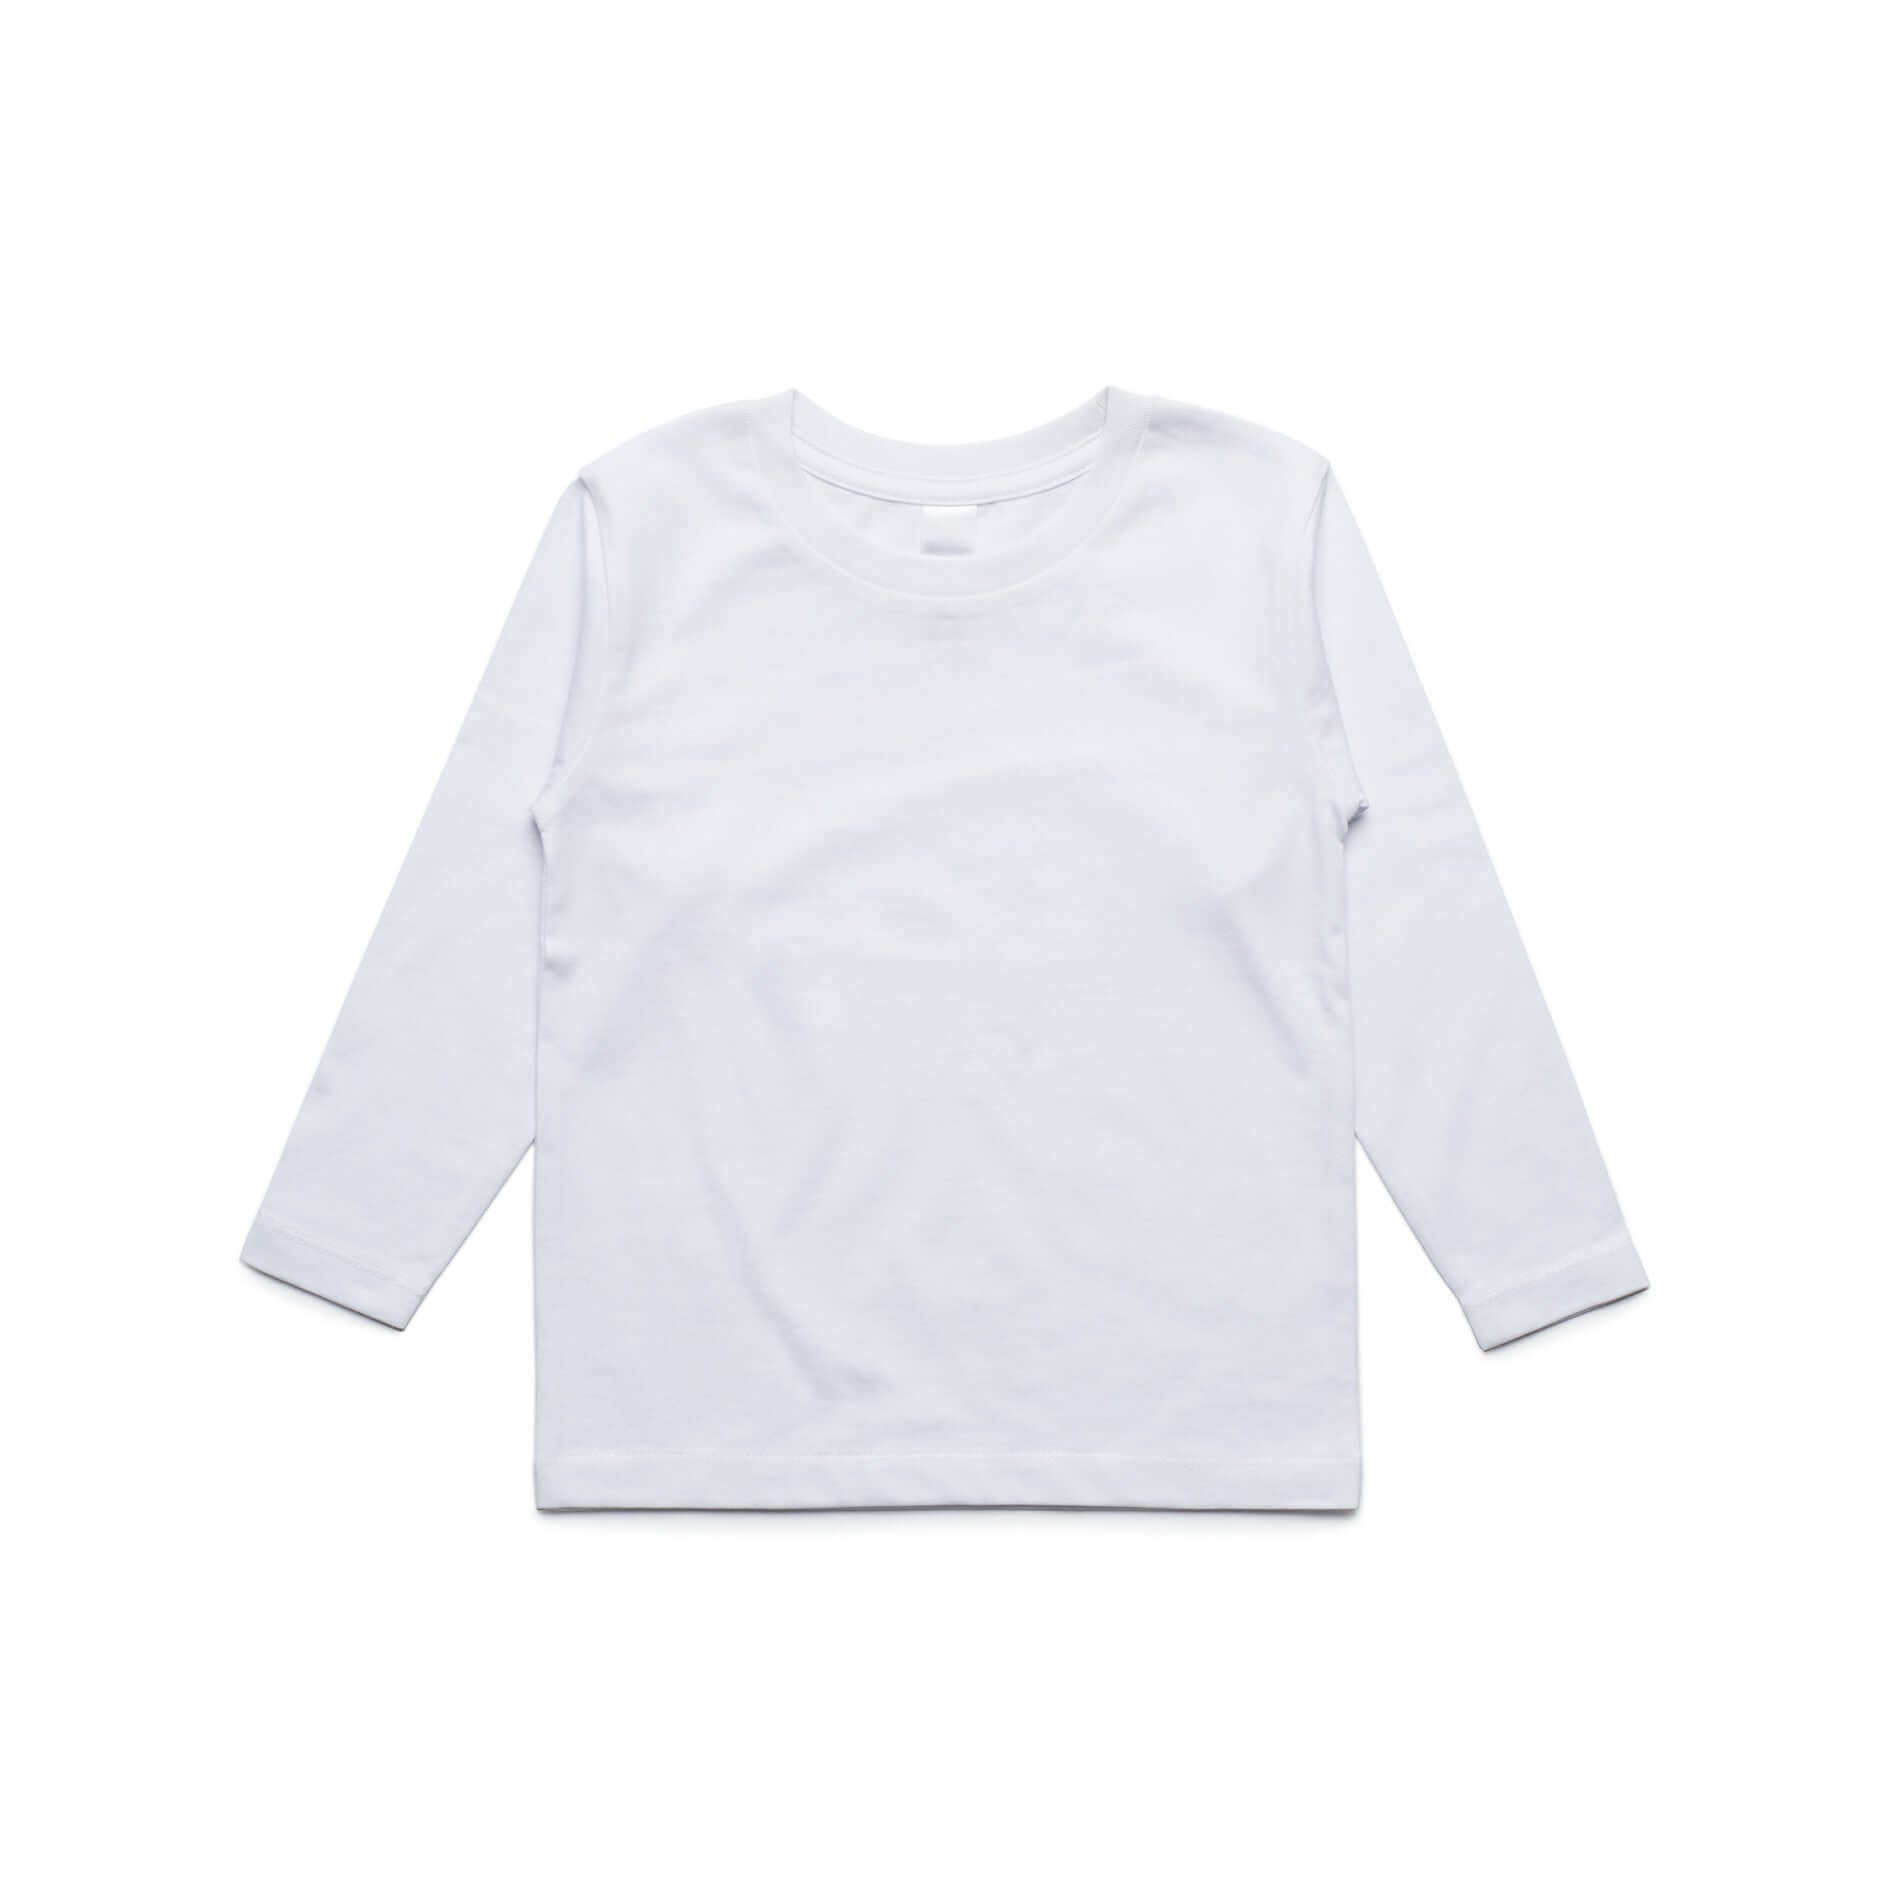 AS Colour Kids Cotton Long Sleeve Basic Tee Shirt White, Black and Grey Marl - Frankie's Story - 1